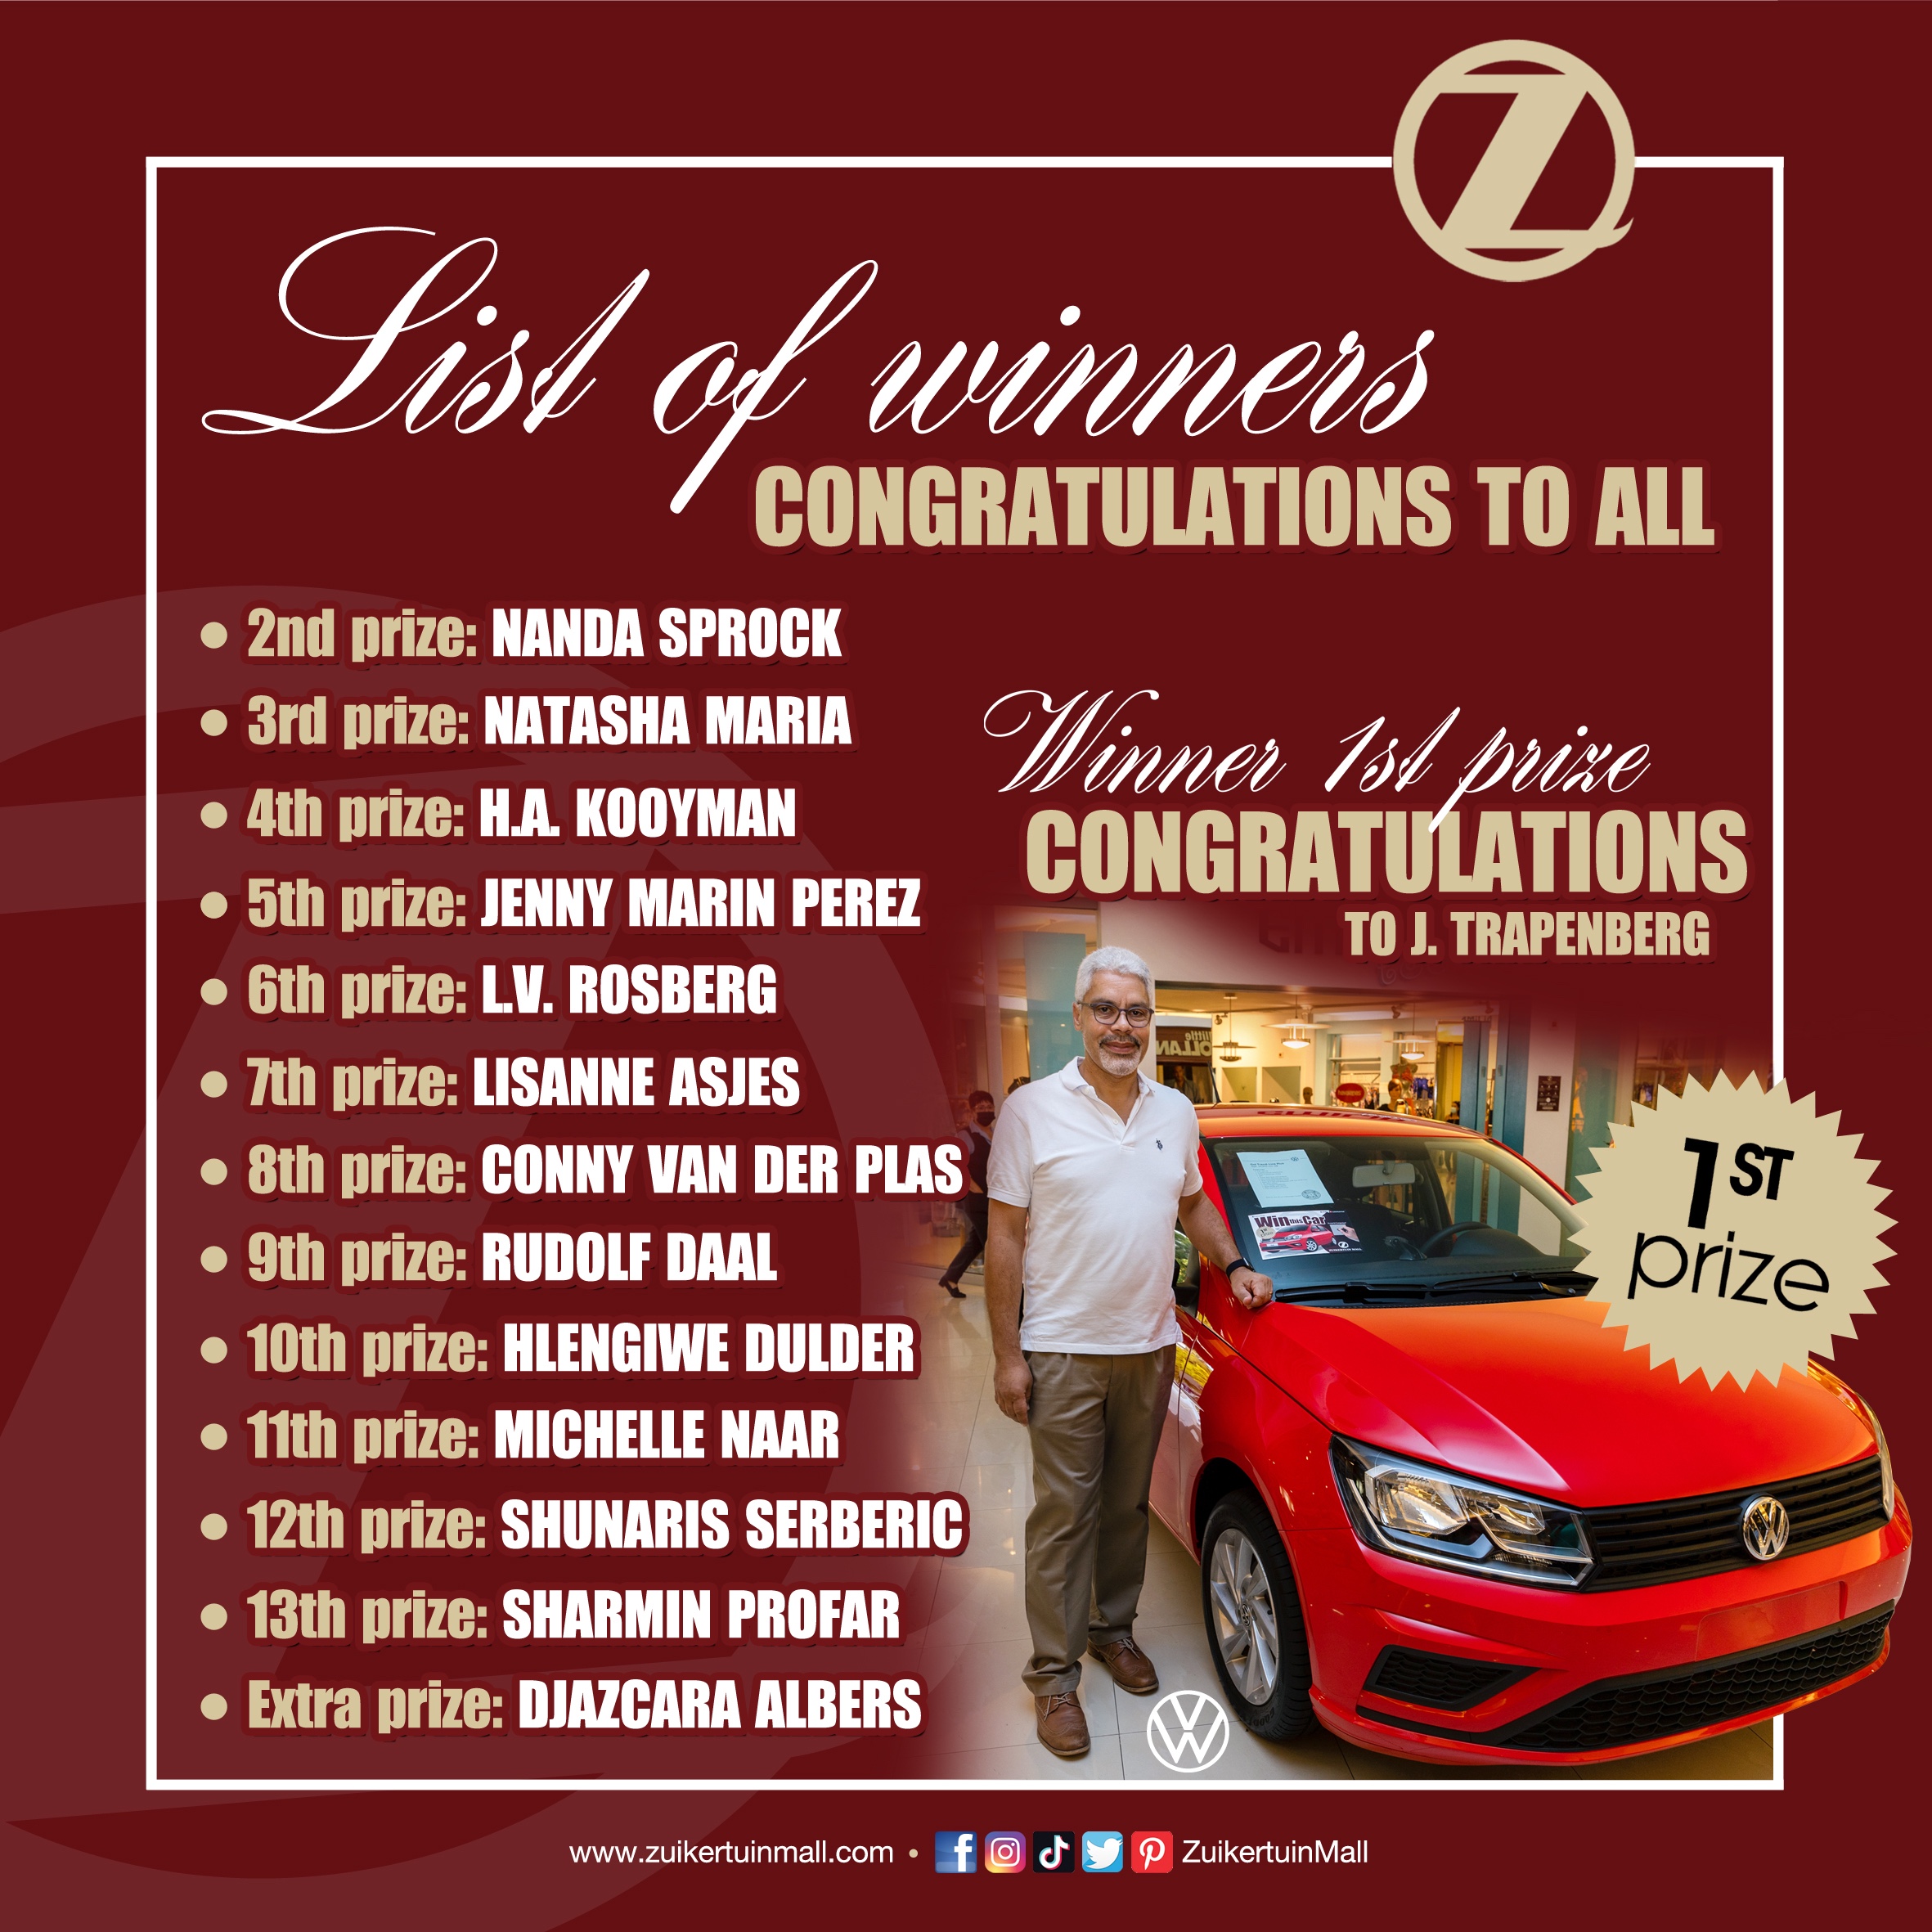 Congratulations to all the winners of the Zuikertuintje end-of-year campaign.